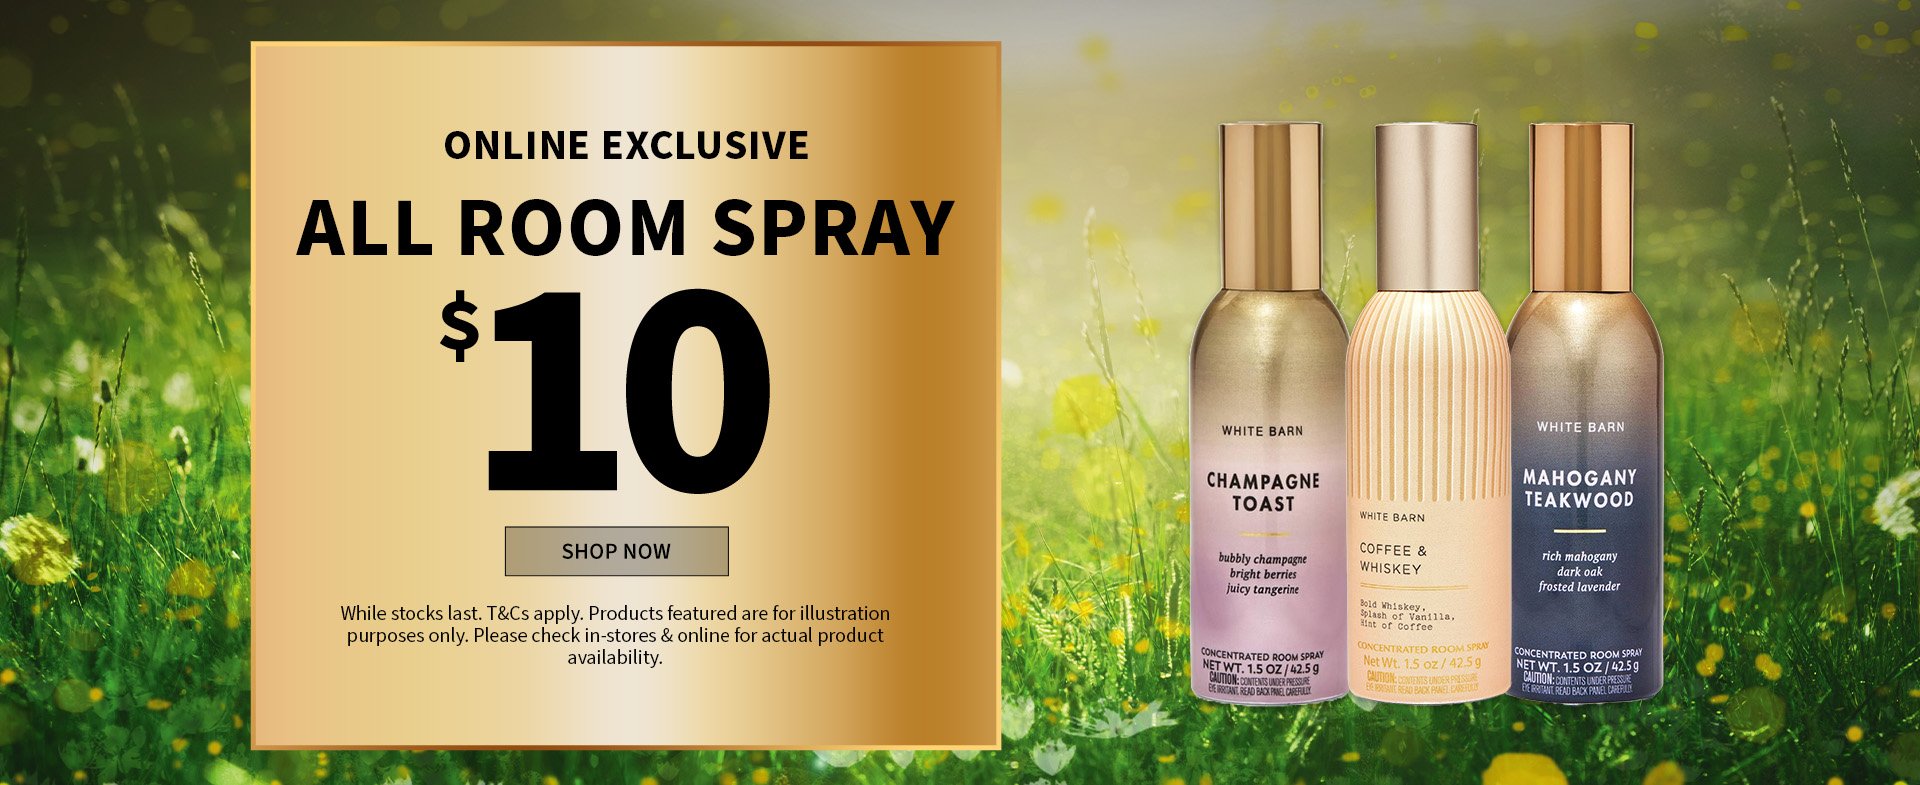 ONLINE EXCLUSIVE ALL ROOM SPRAY $$